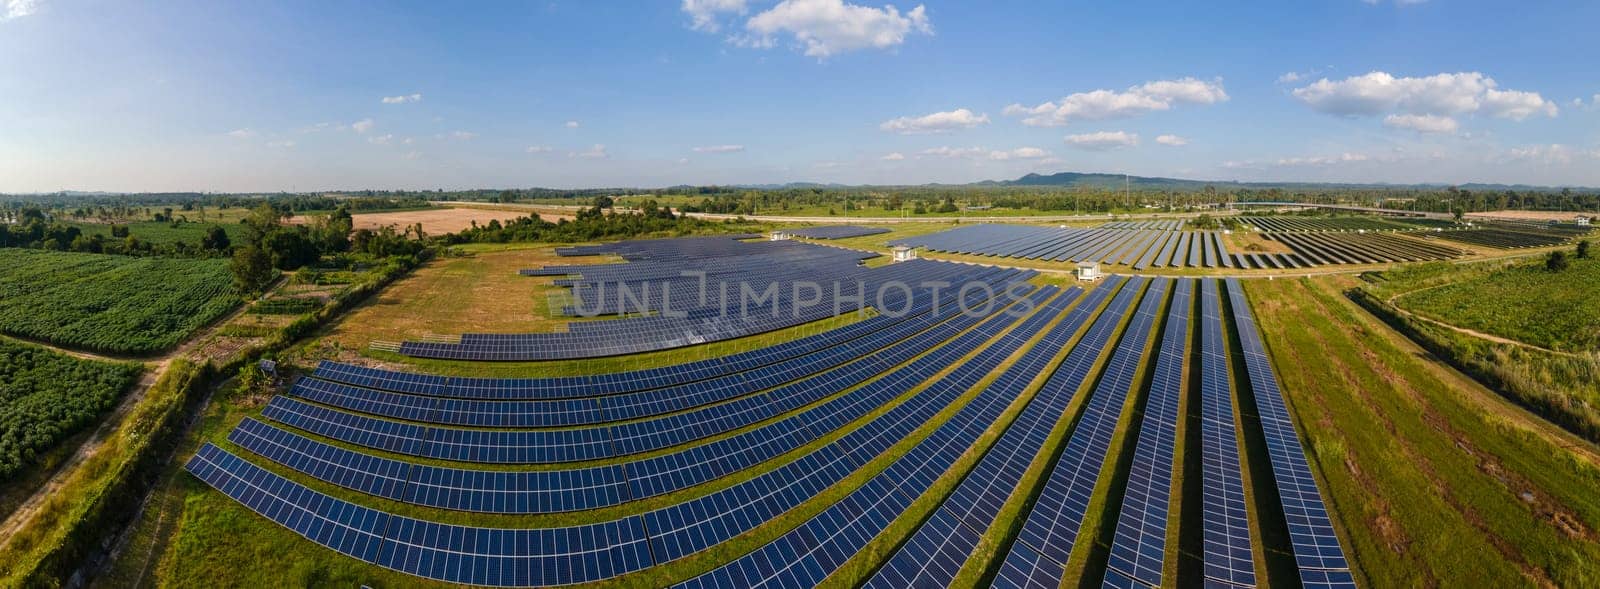 Solar panels system power generators from the sun. Energy Transition in Chonburi Thailand